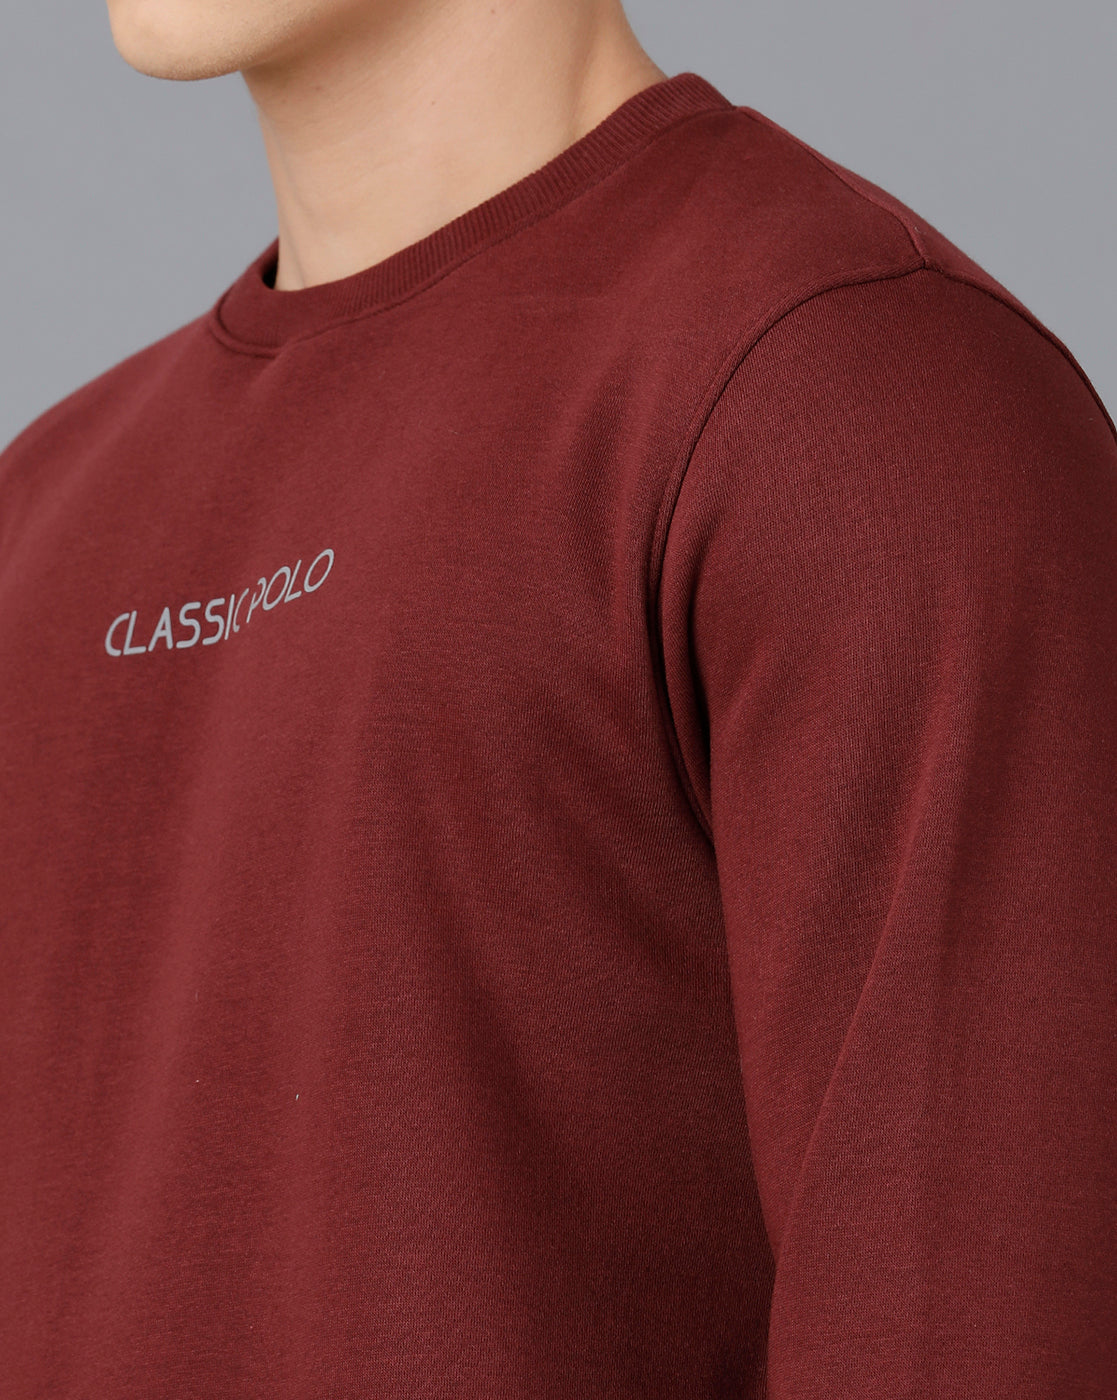 Classic Polo Mens Cotton Blend Full Sleeve Solid Slim Fit Maroon Color Round Neck Sweat Shirt | Cpss - 414 I